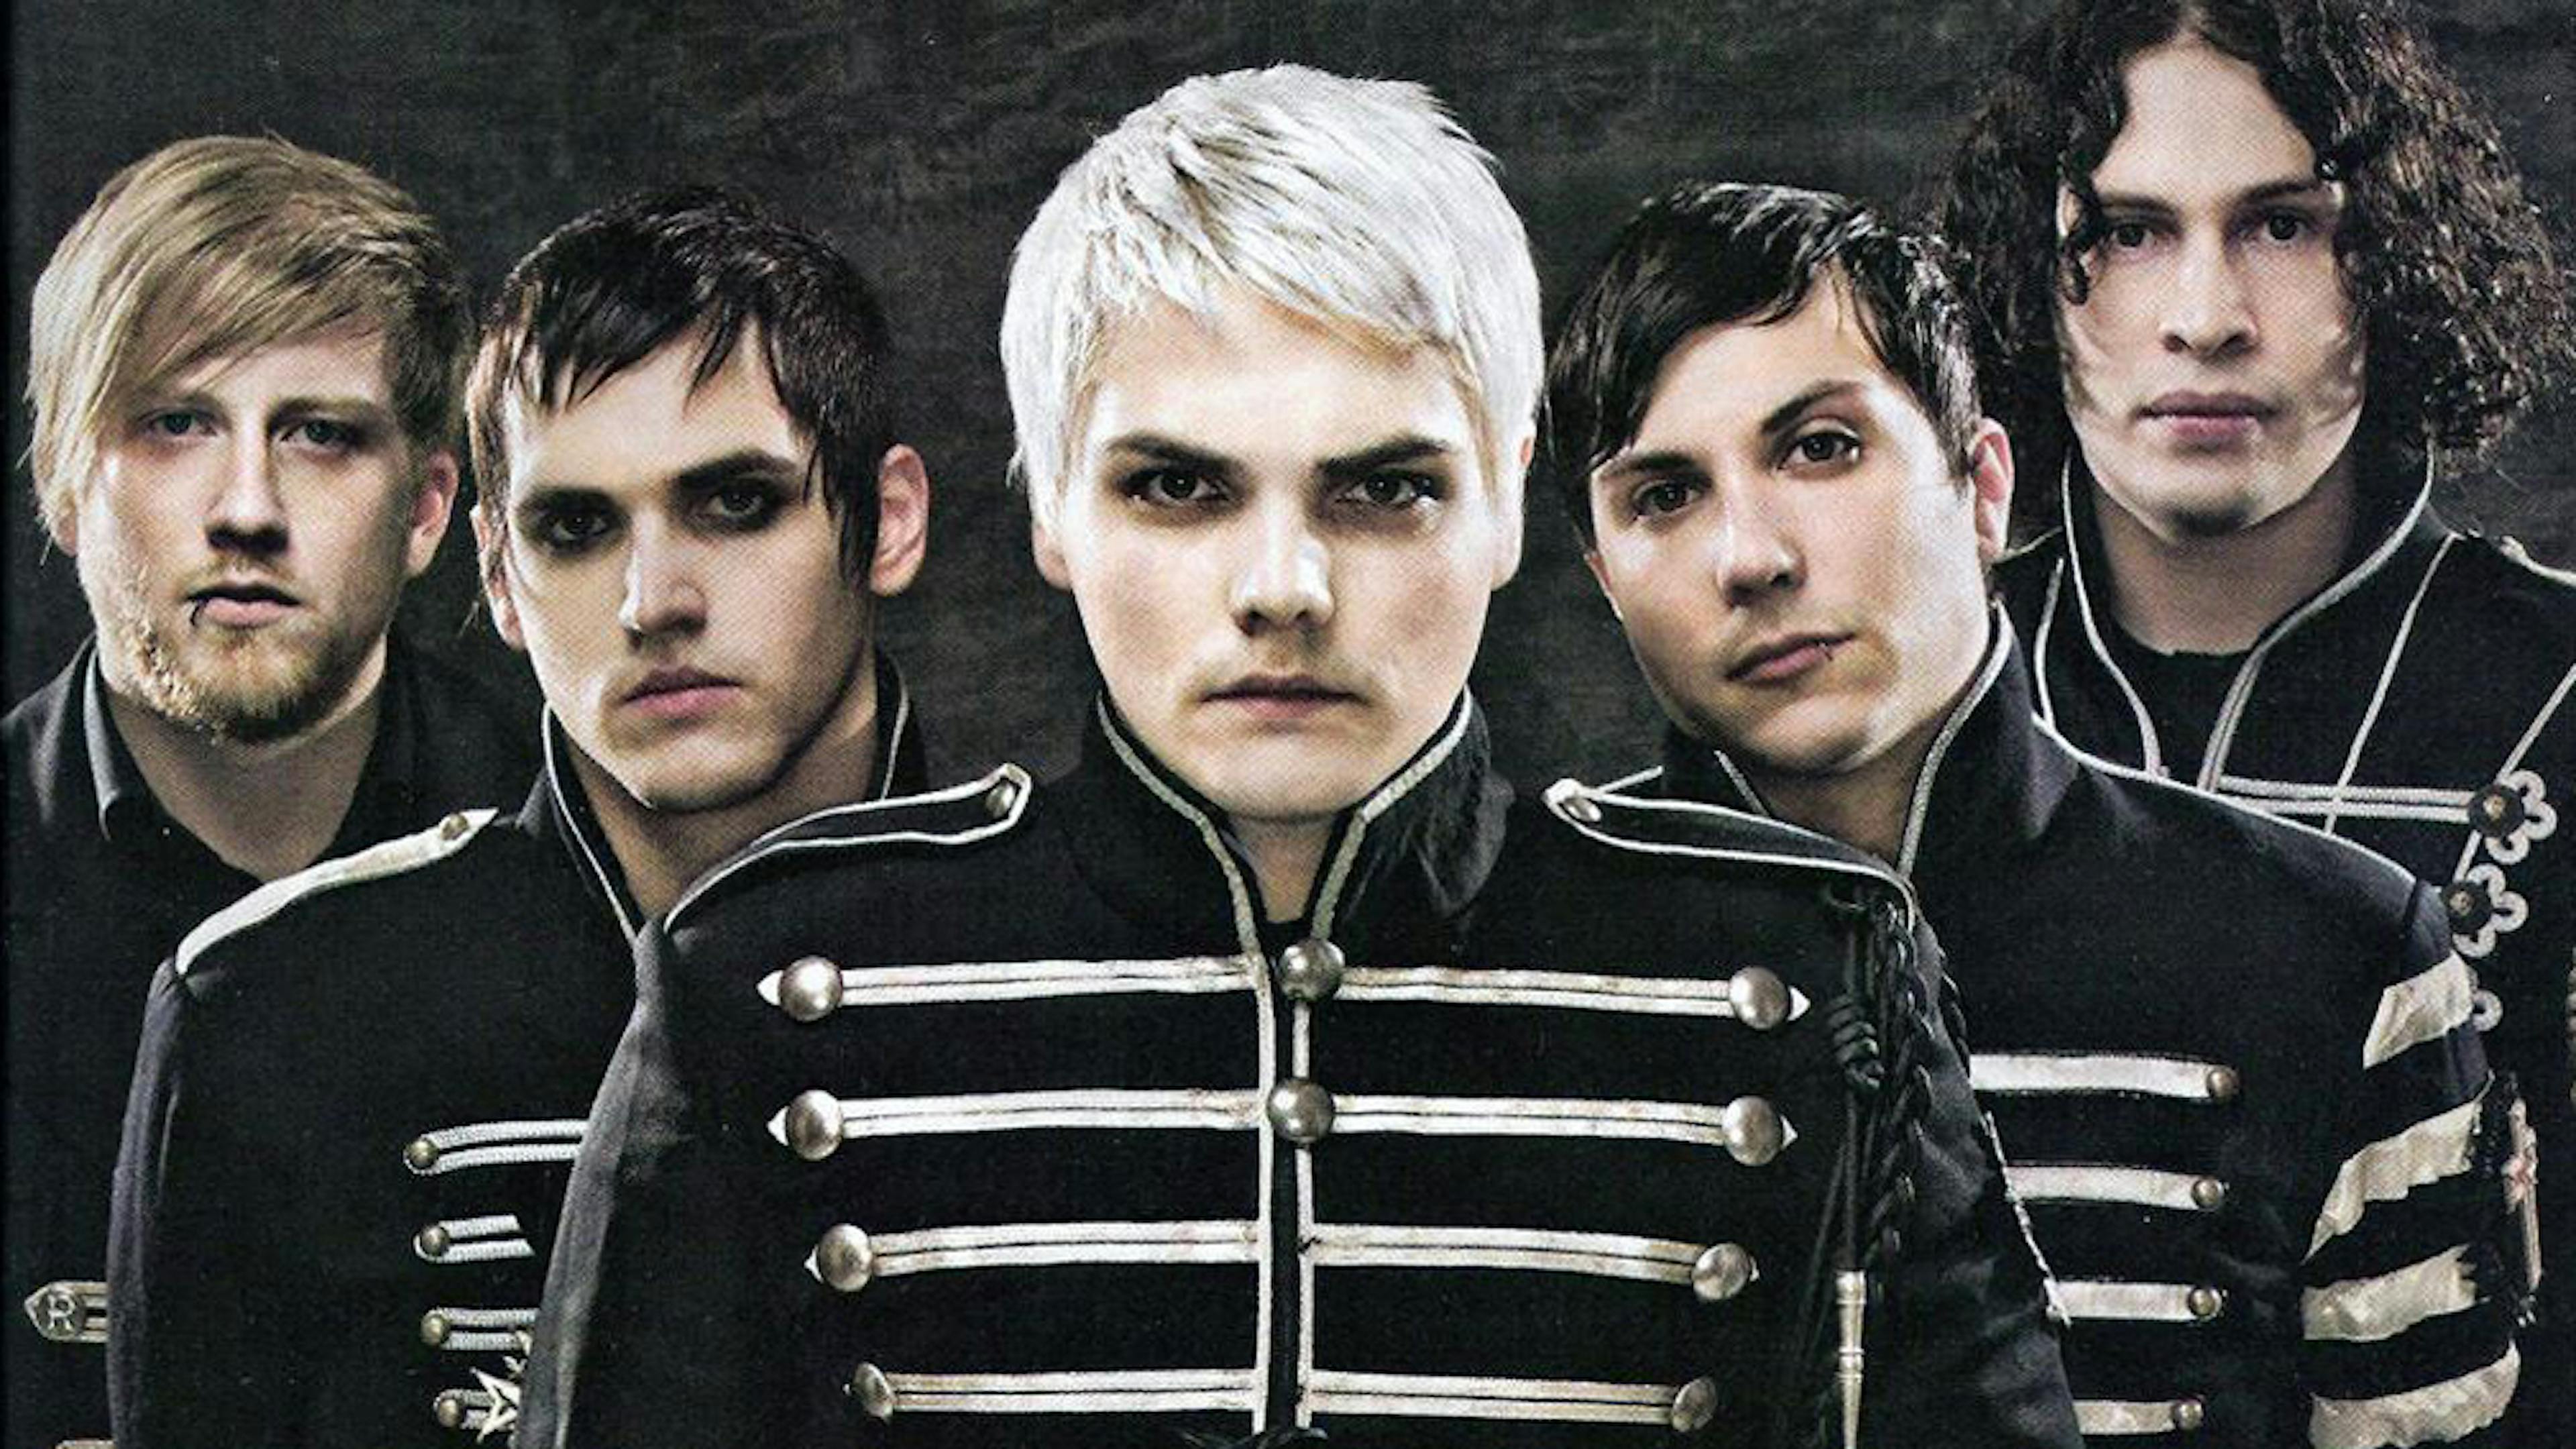 Coronavirus Prevention: Welcome To The Black Parade Is The Best Song To Wash Your Hands To